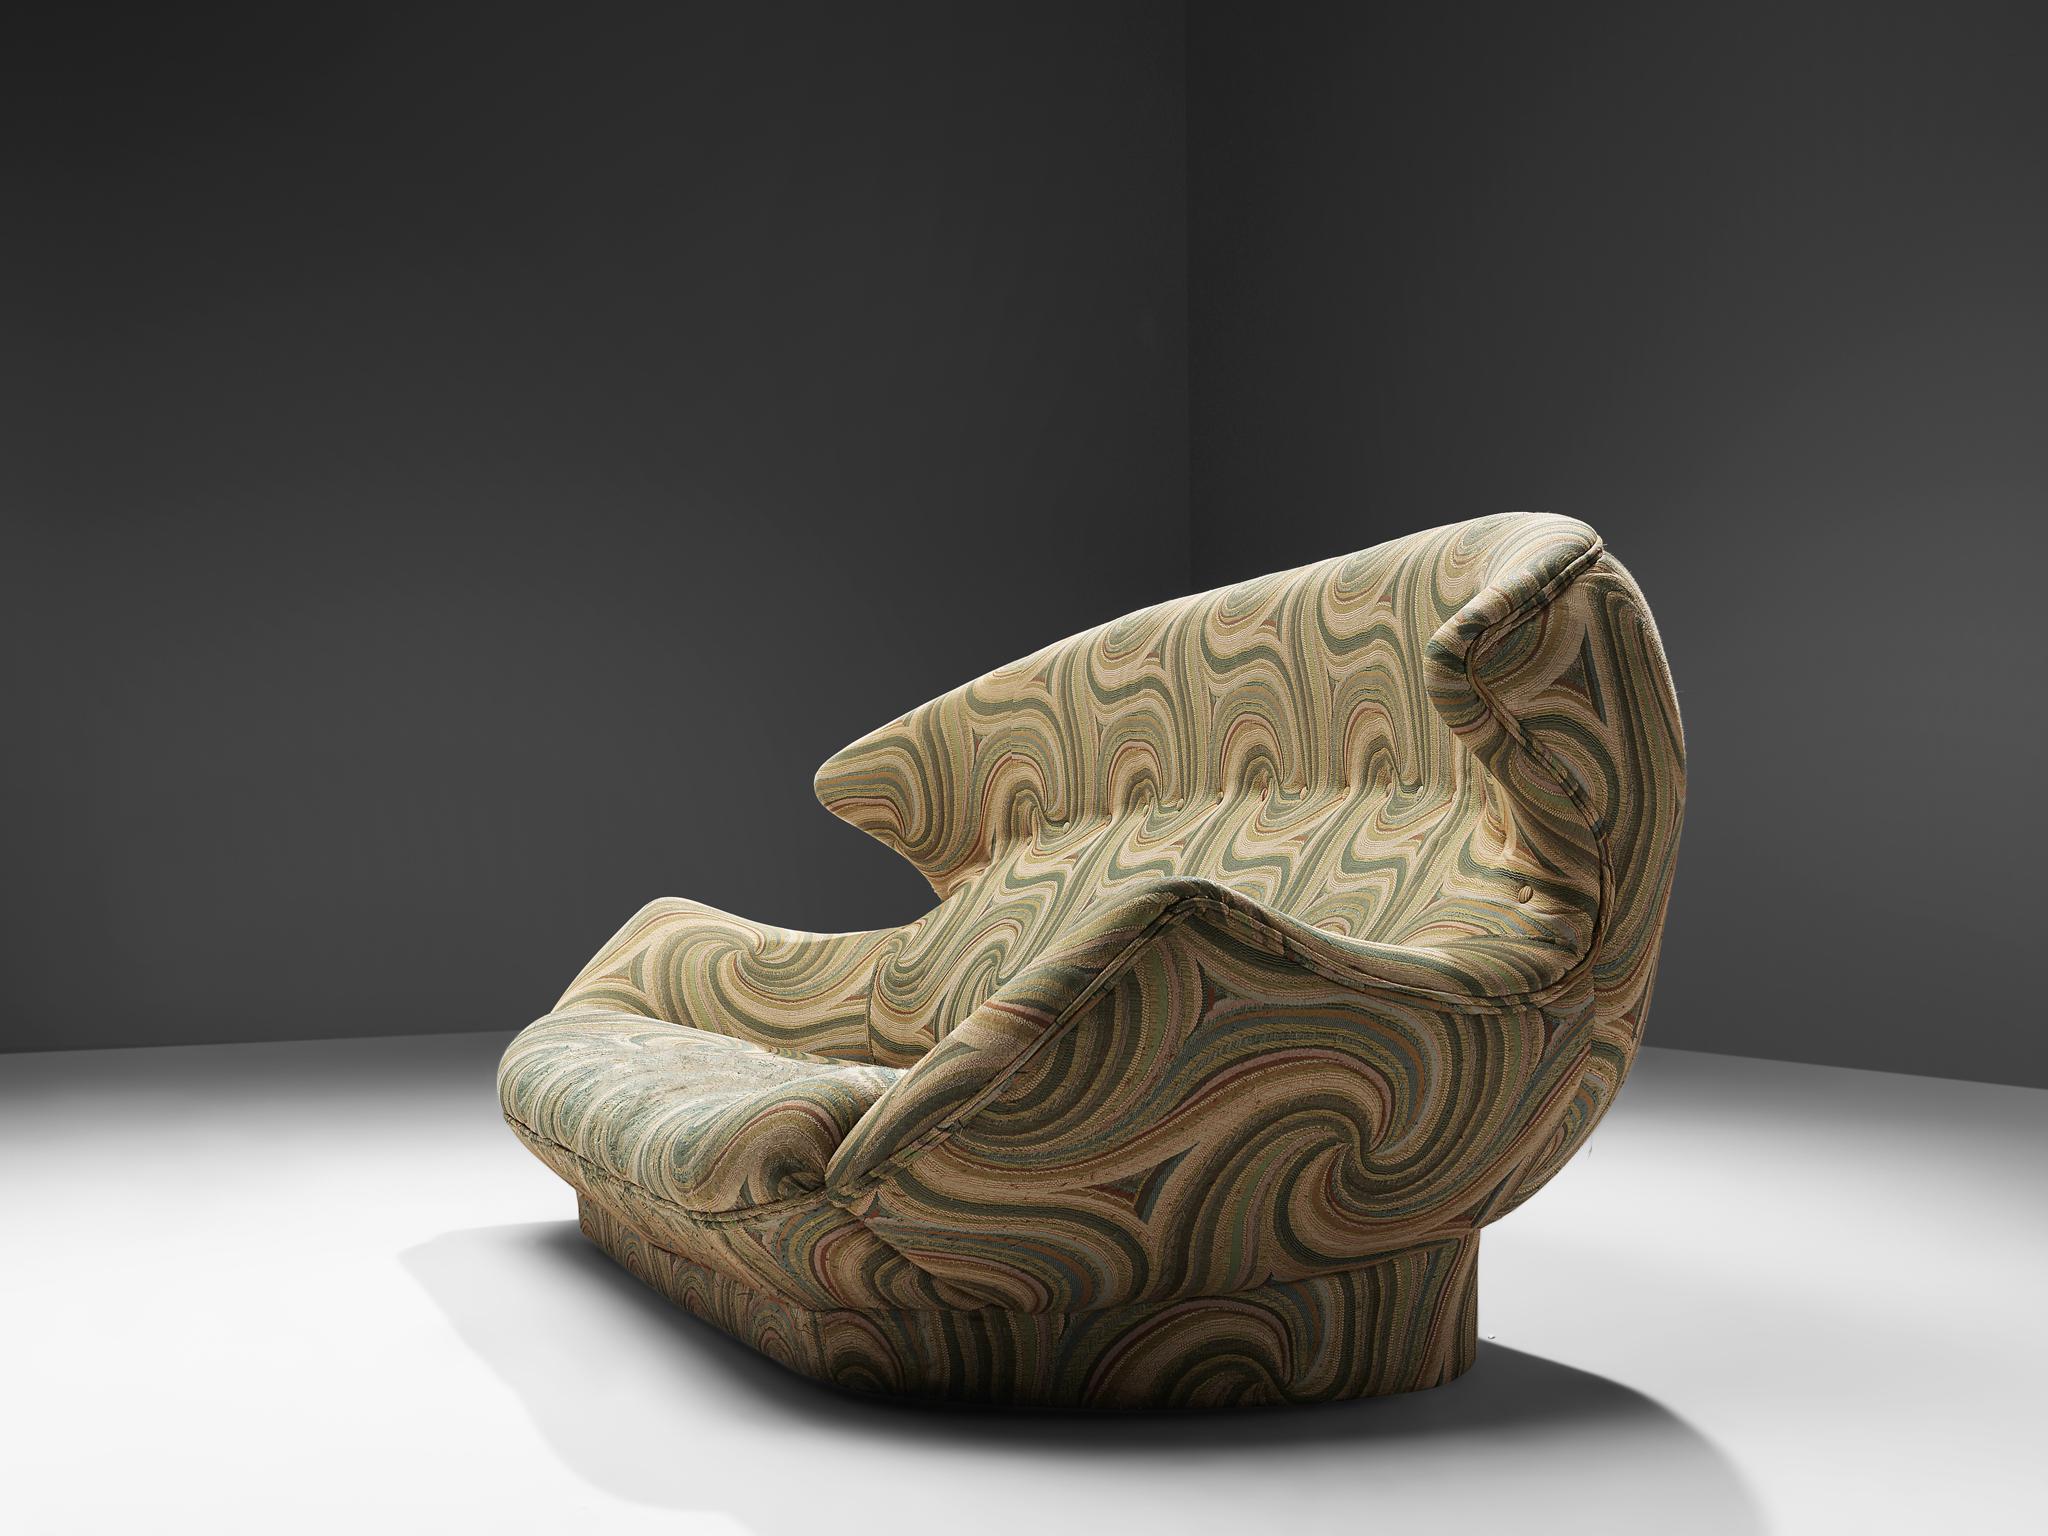 European Winged 1970s Sofa in Patterned Upholstery